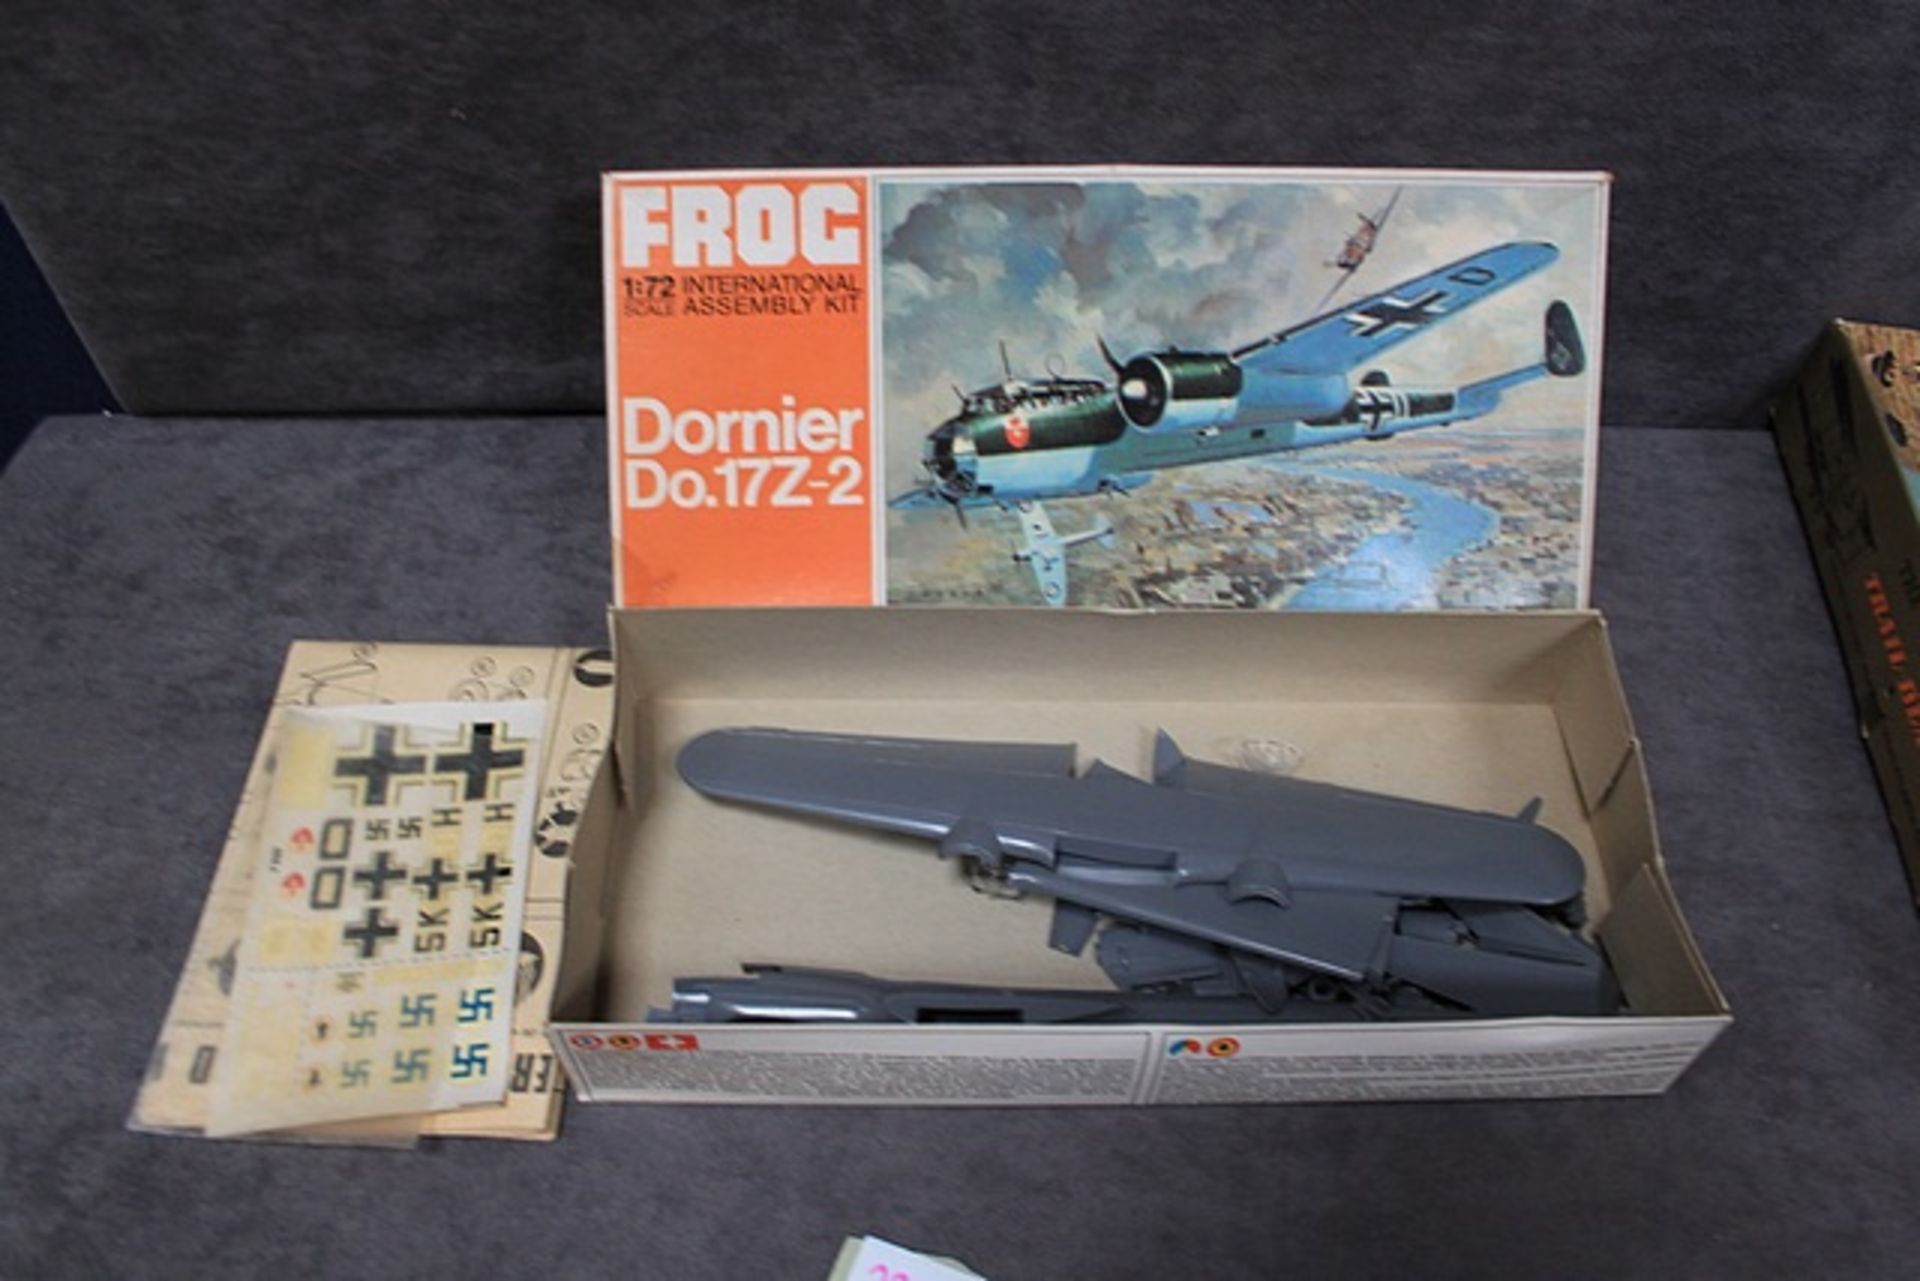 Frog 1:72 scale #F205 Dornier Do.17Z-22 with instructions in box - Image 2 of 2